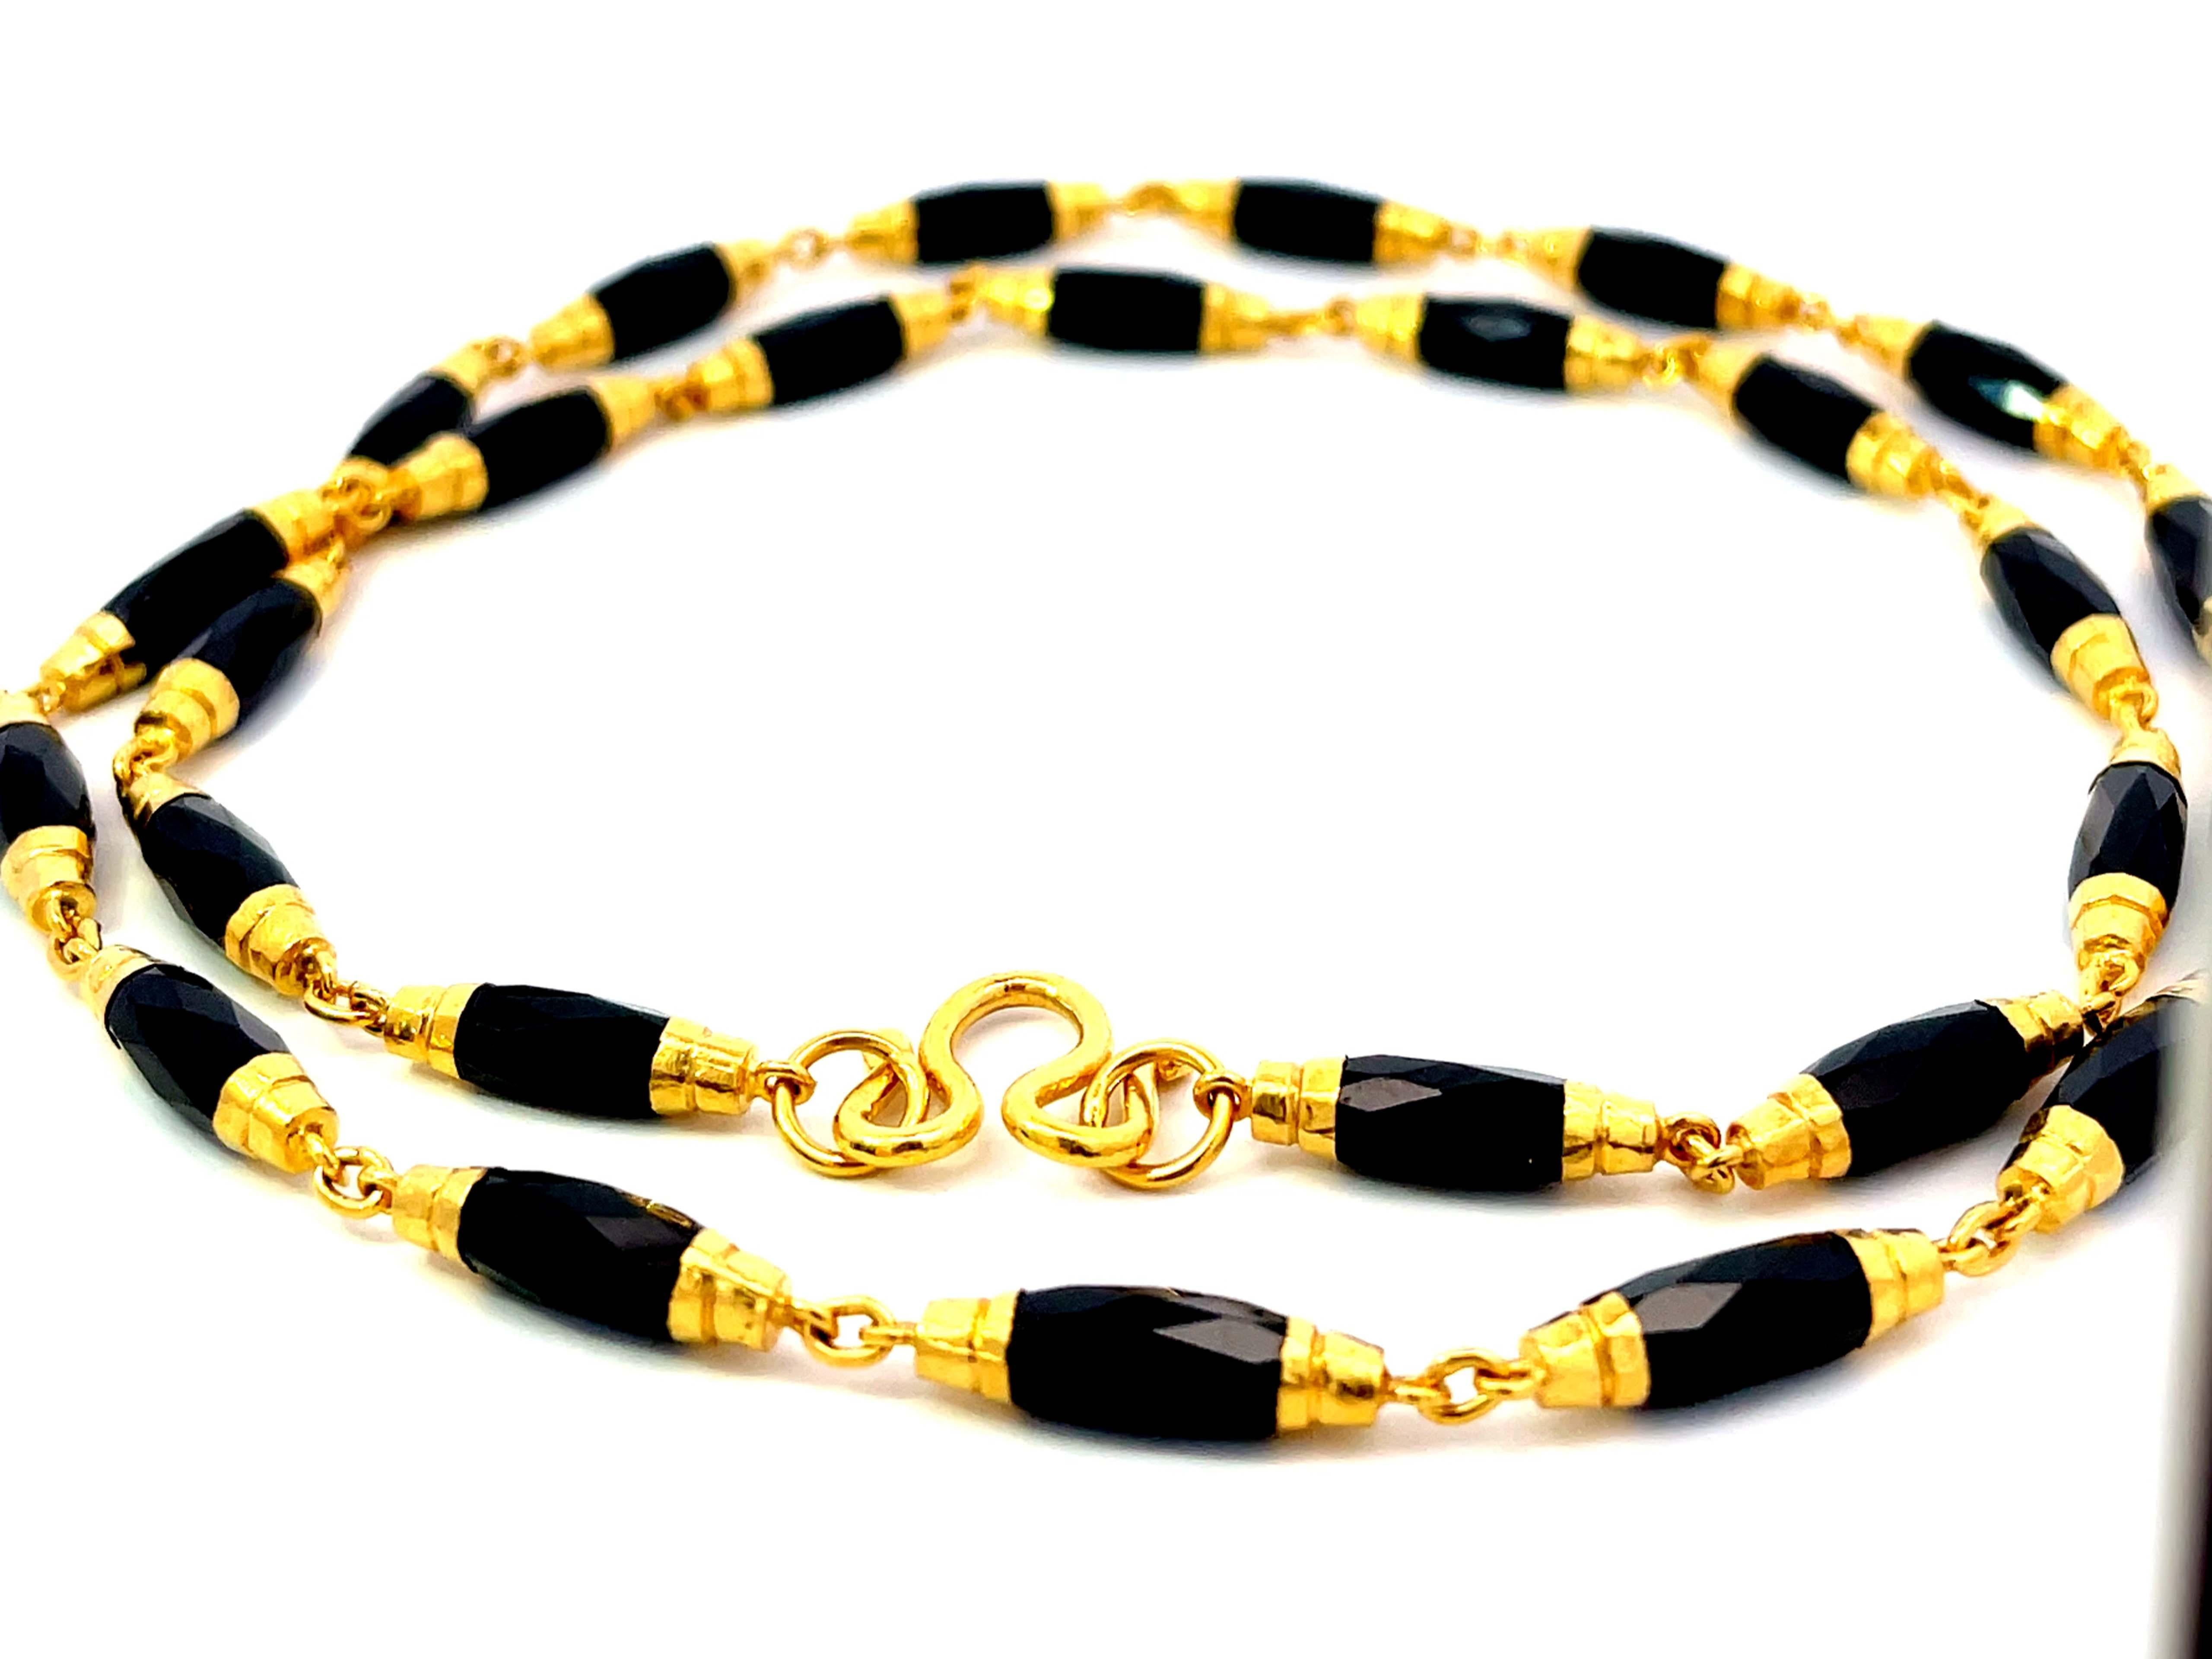 22k gold bead necklace